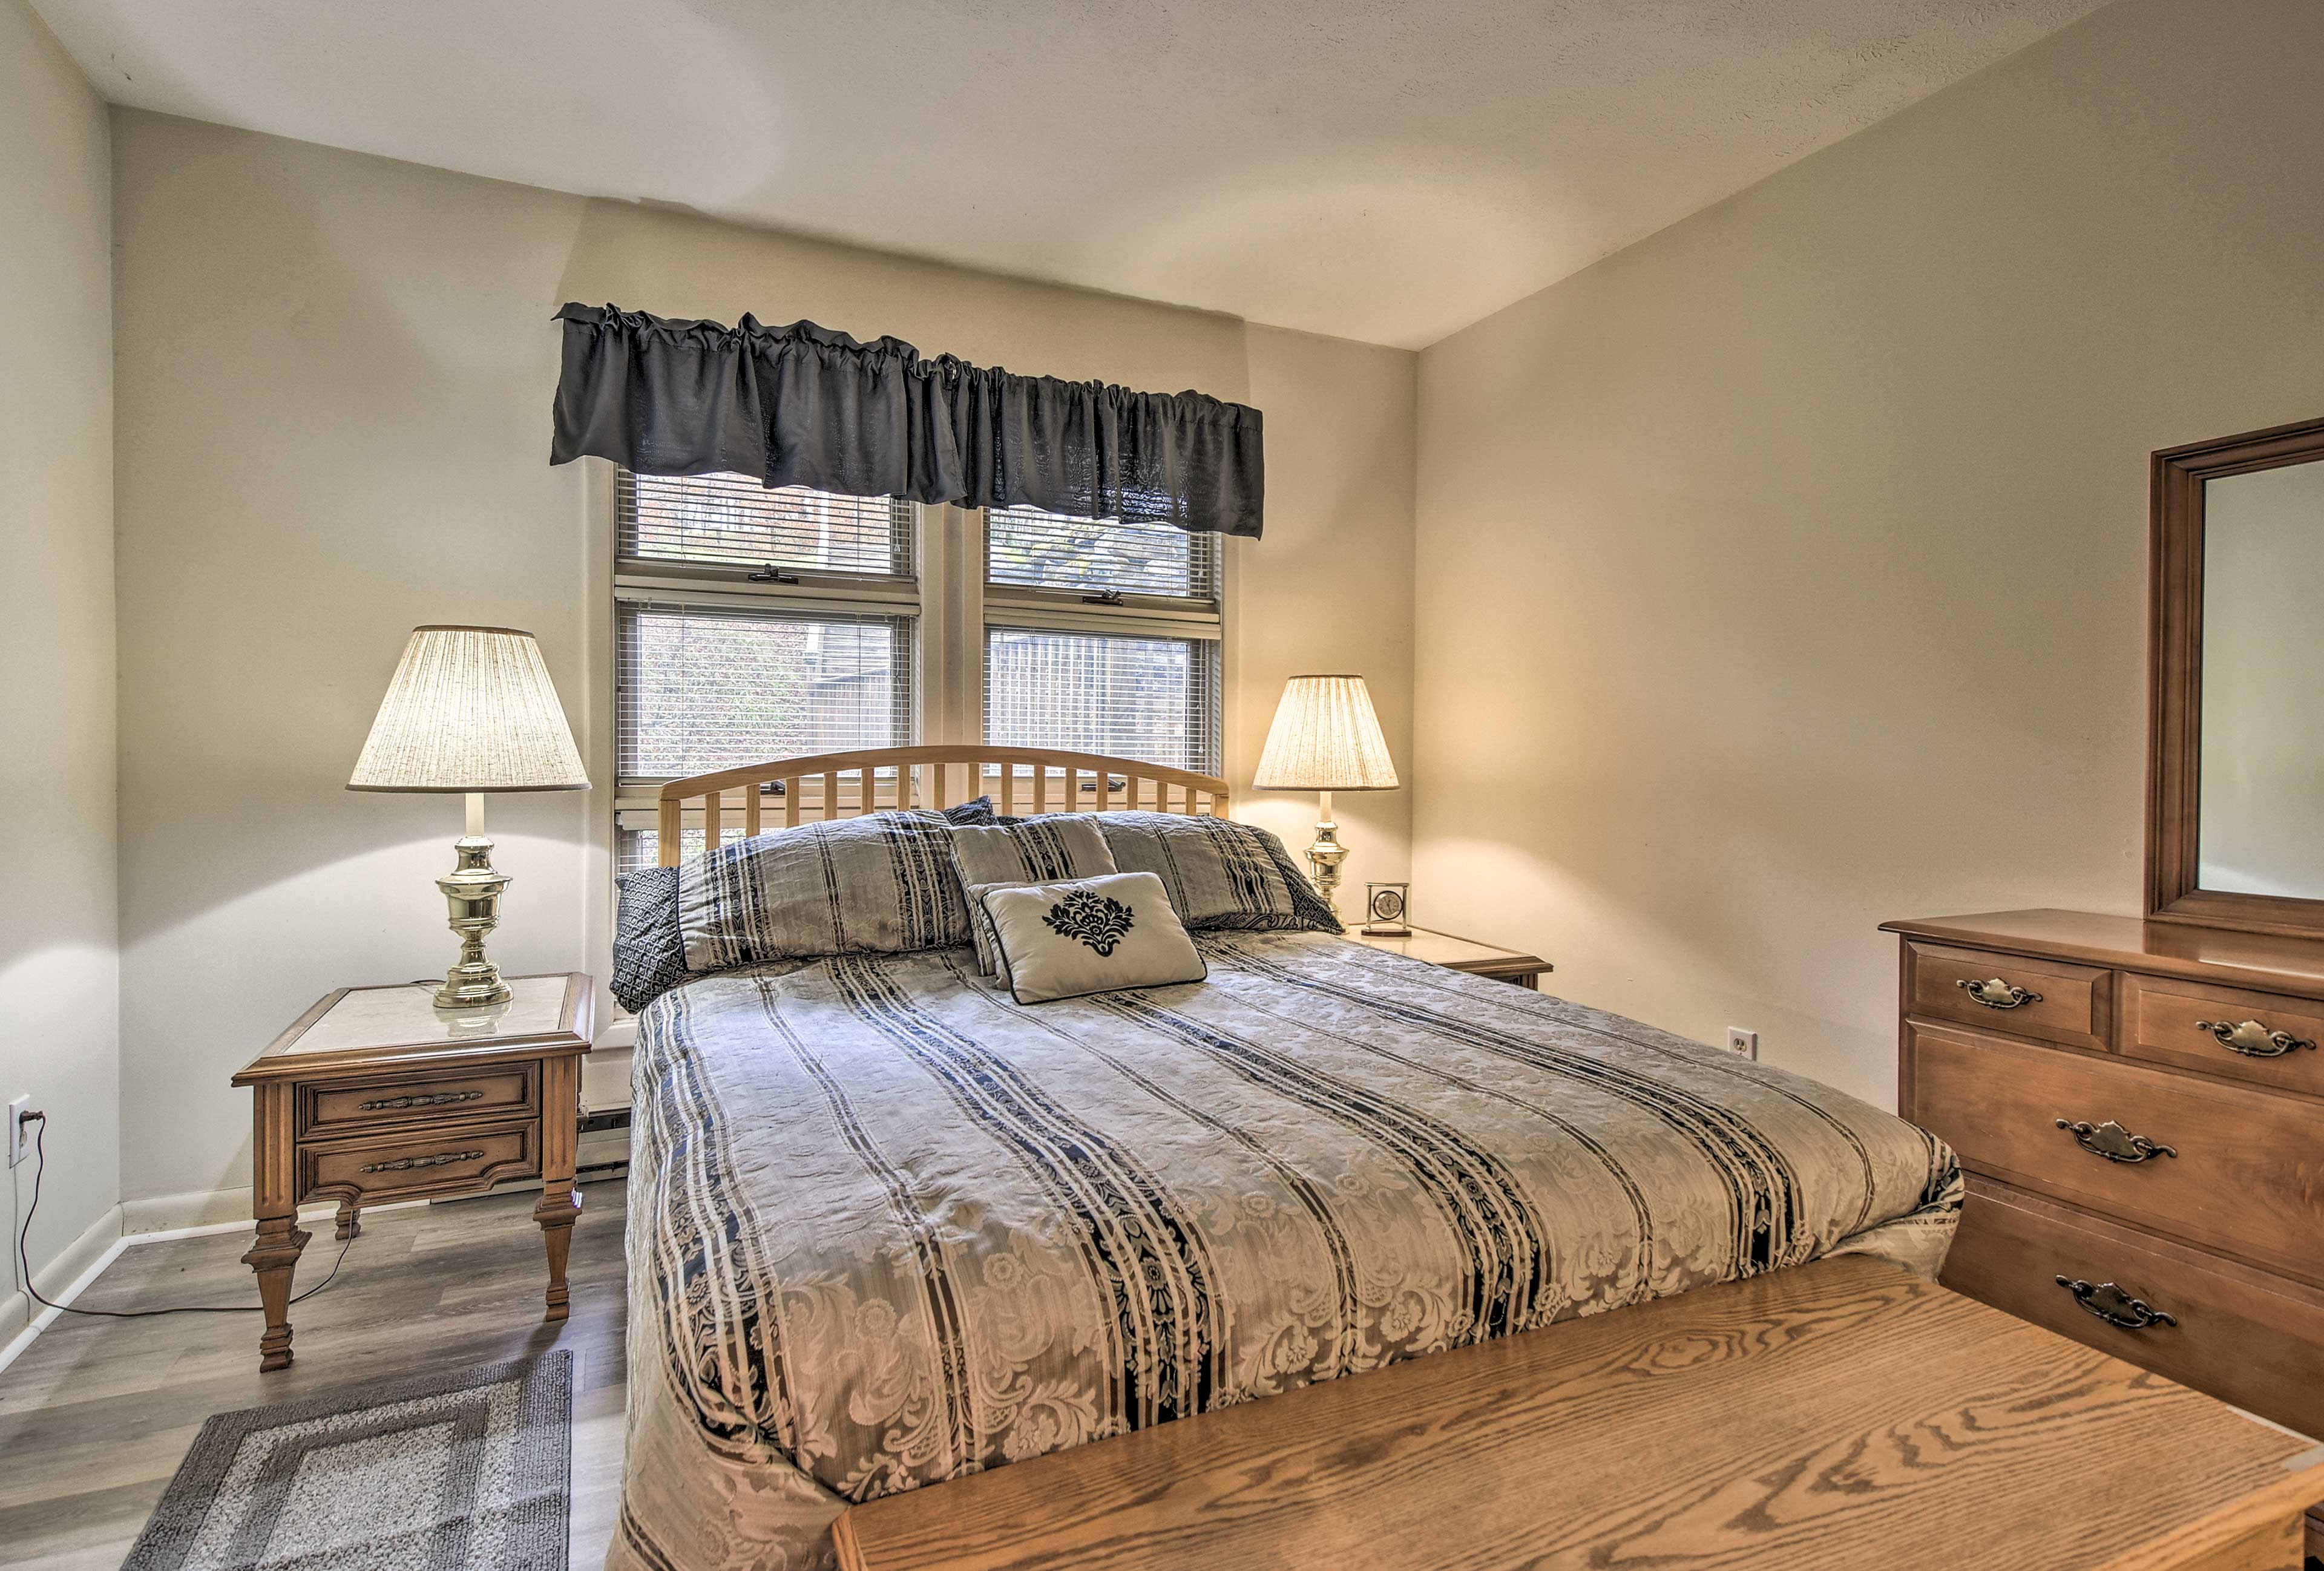 A queen bed highlights this first bedroom.